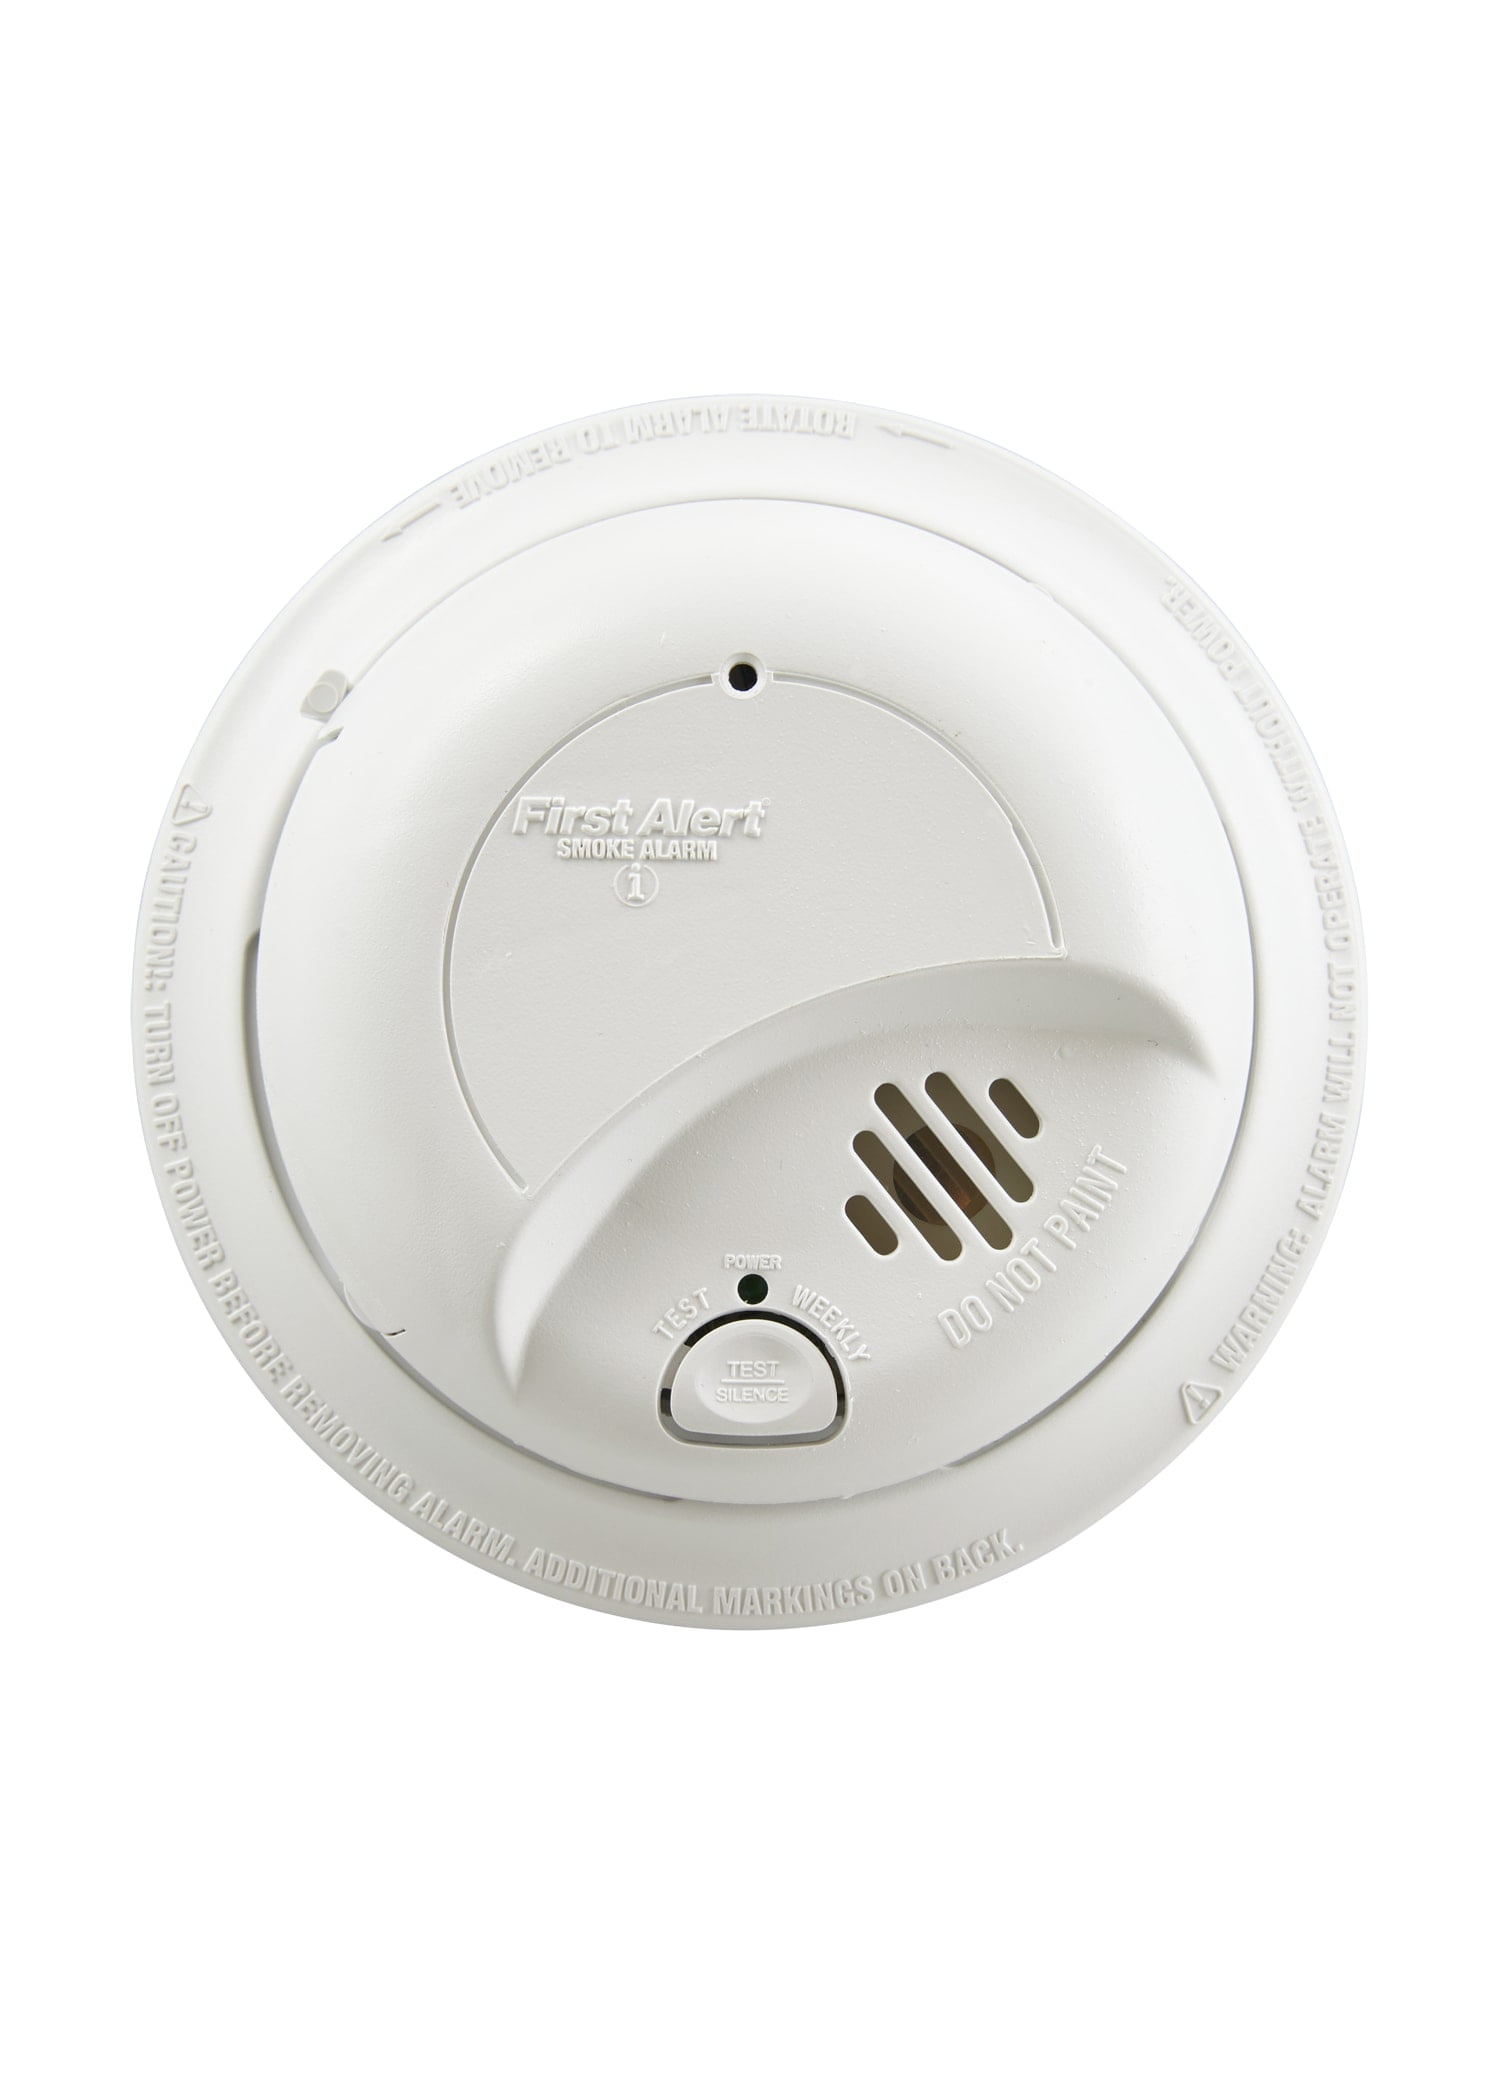 6-Pack First Alert 9120B6CP 120-Volt Wire-In With Battery Backup Smoke Alarm